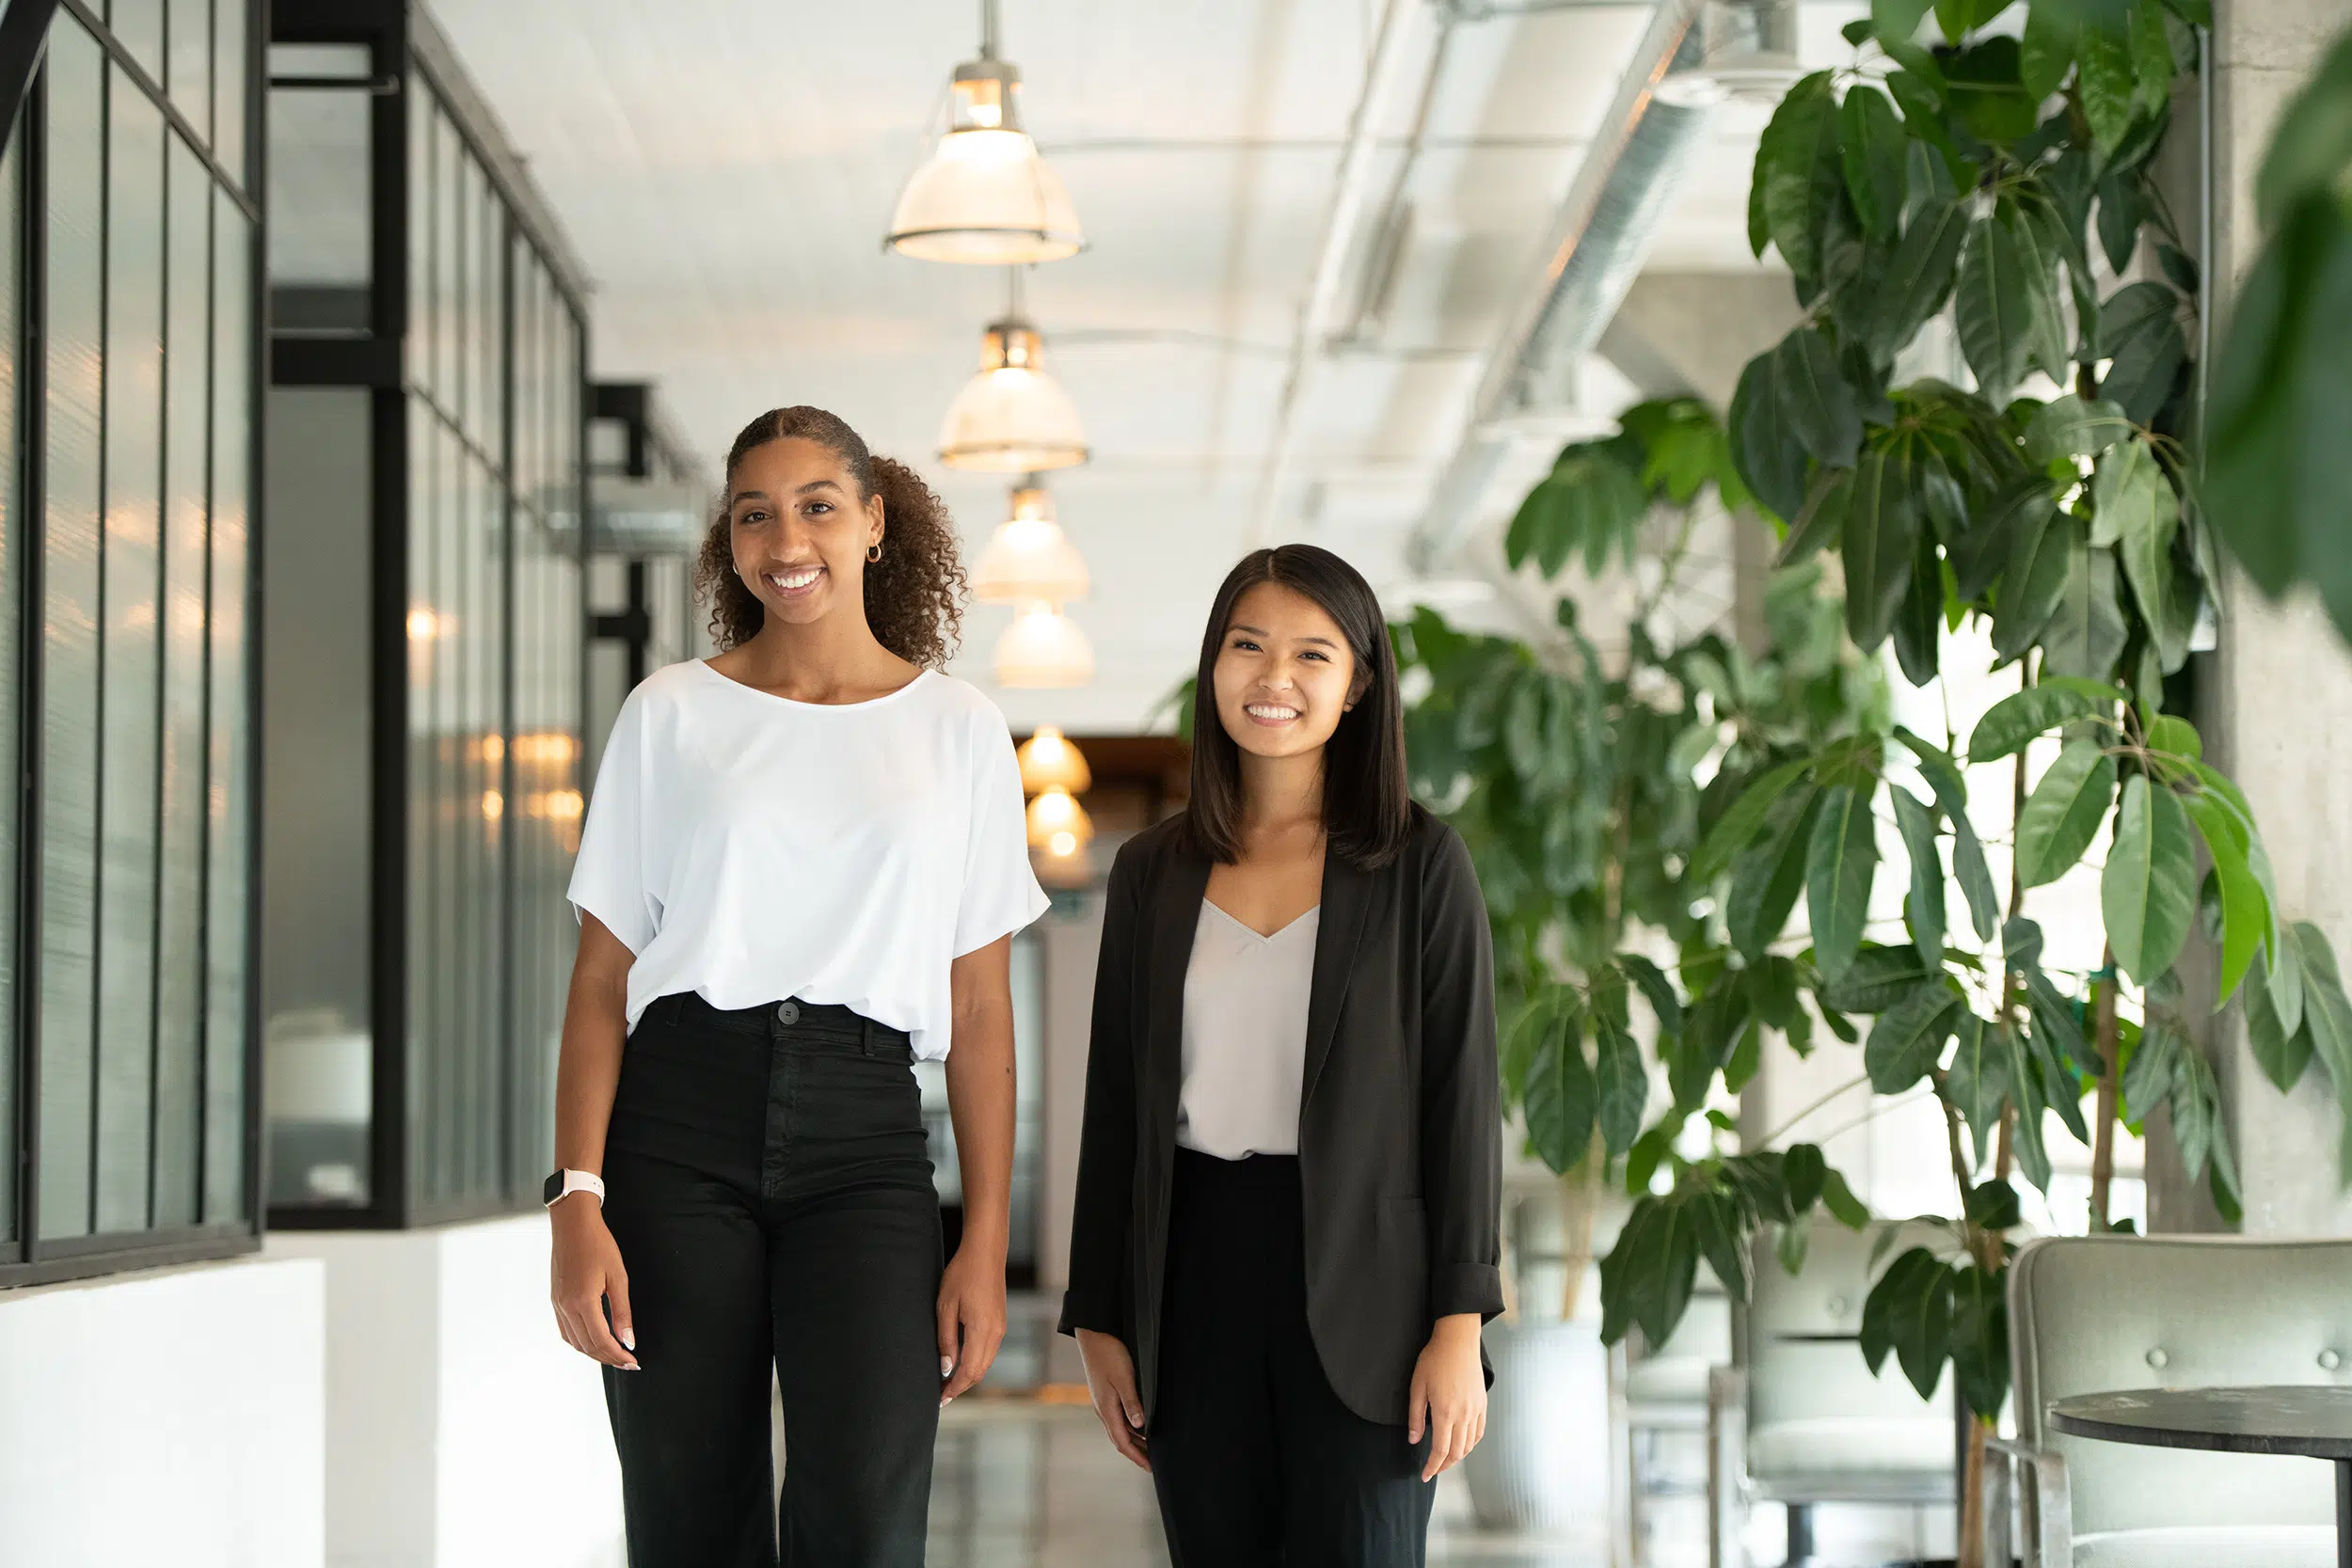 Two young female business professionals stop for a photo in a modern office.